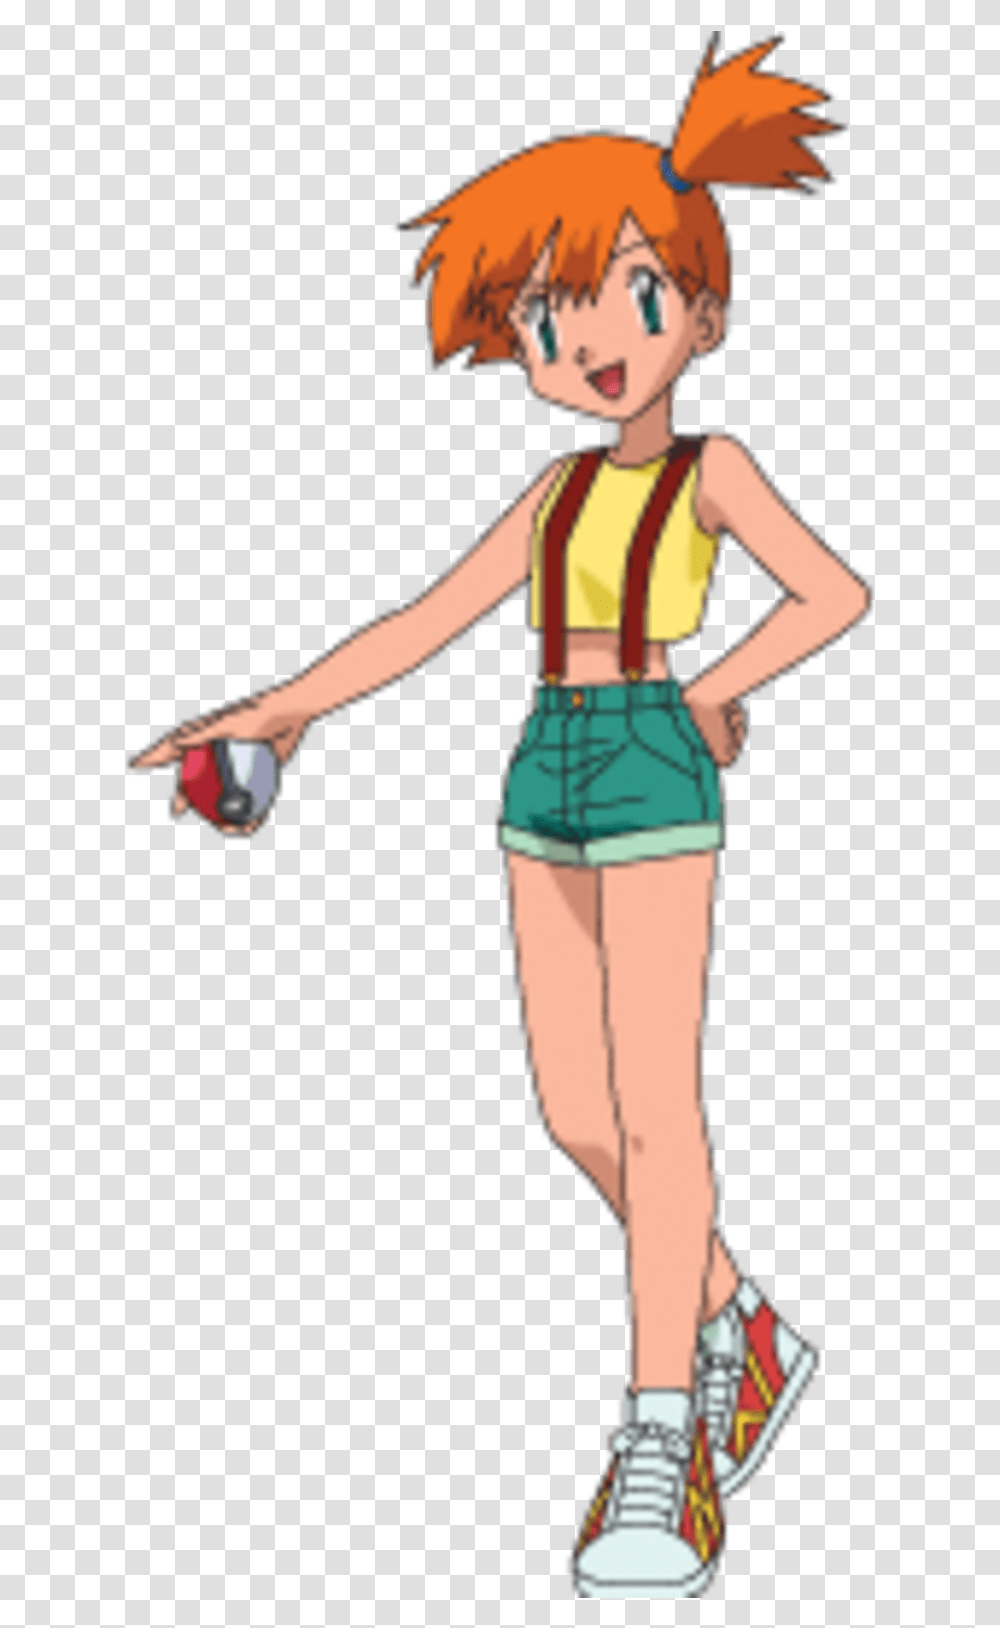 Download Pokemon Misty Pokemon Misty, Clothing, Person, Arm, Costume Transparent Png